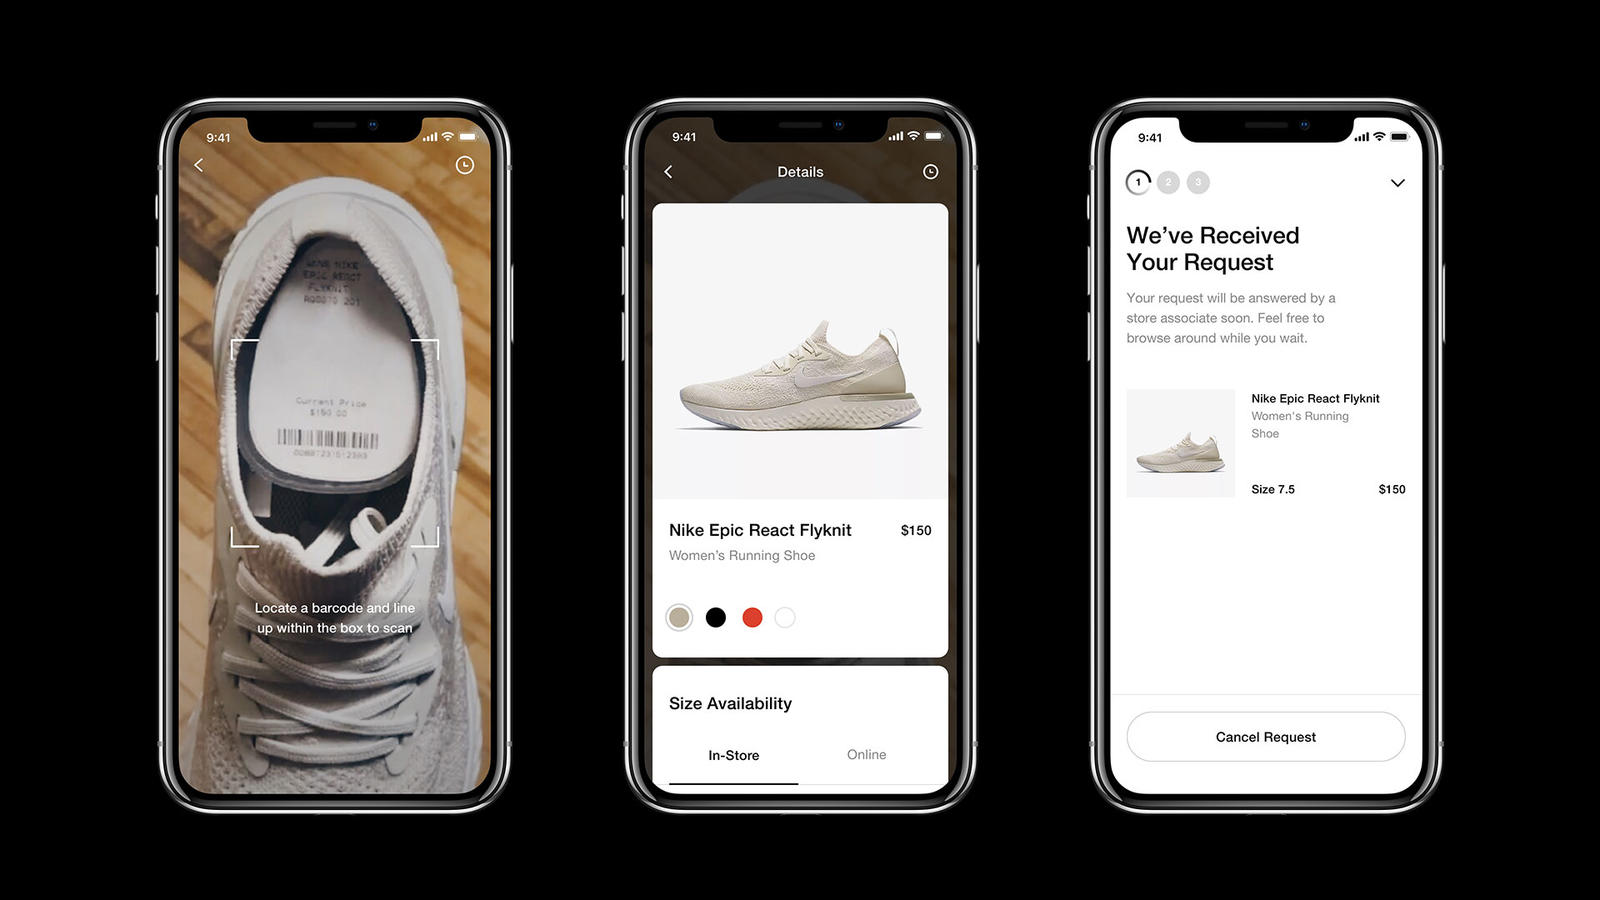 Nike turned to headless commerce — using a Node.js BFF (Backend for frontend) shim combined with React SPA — to offer seamless experiences to its customers